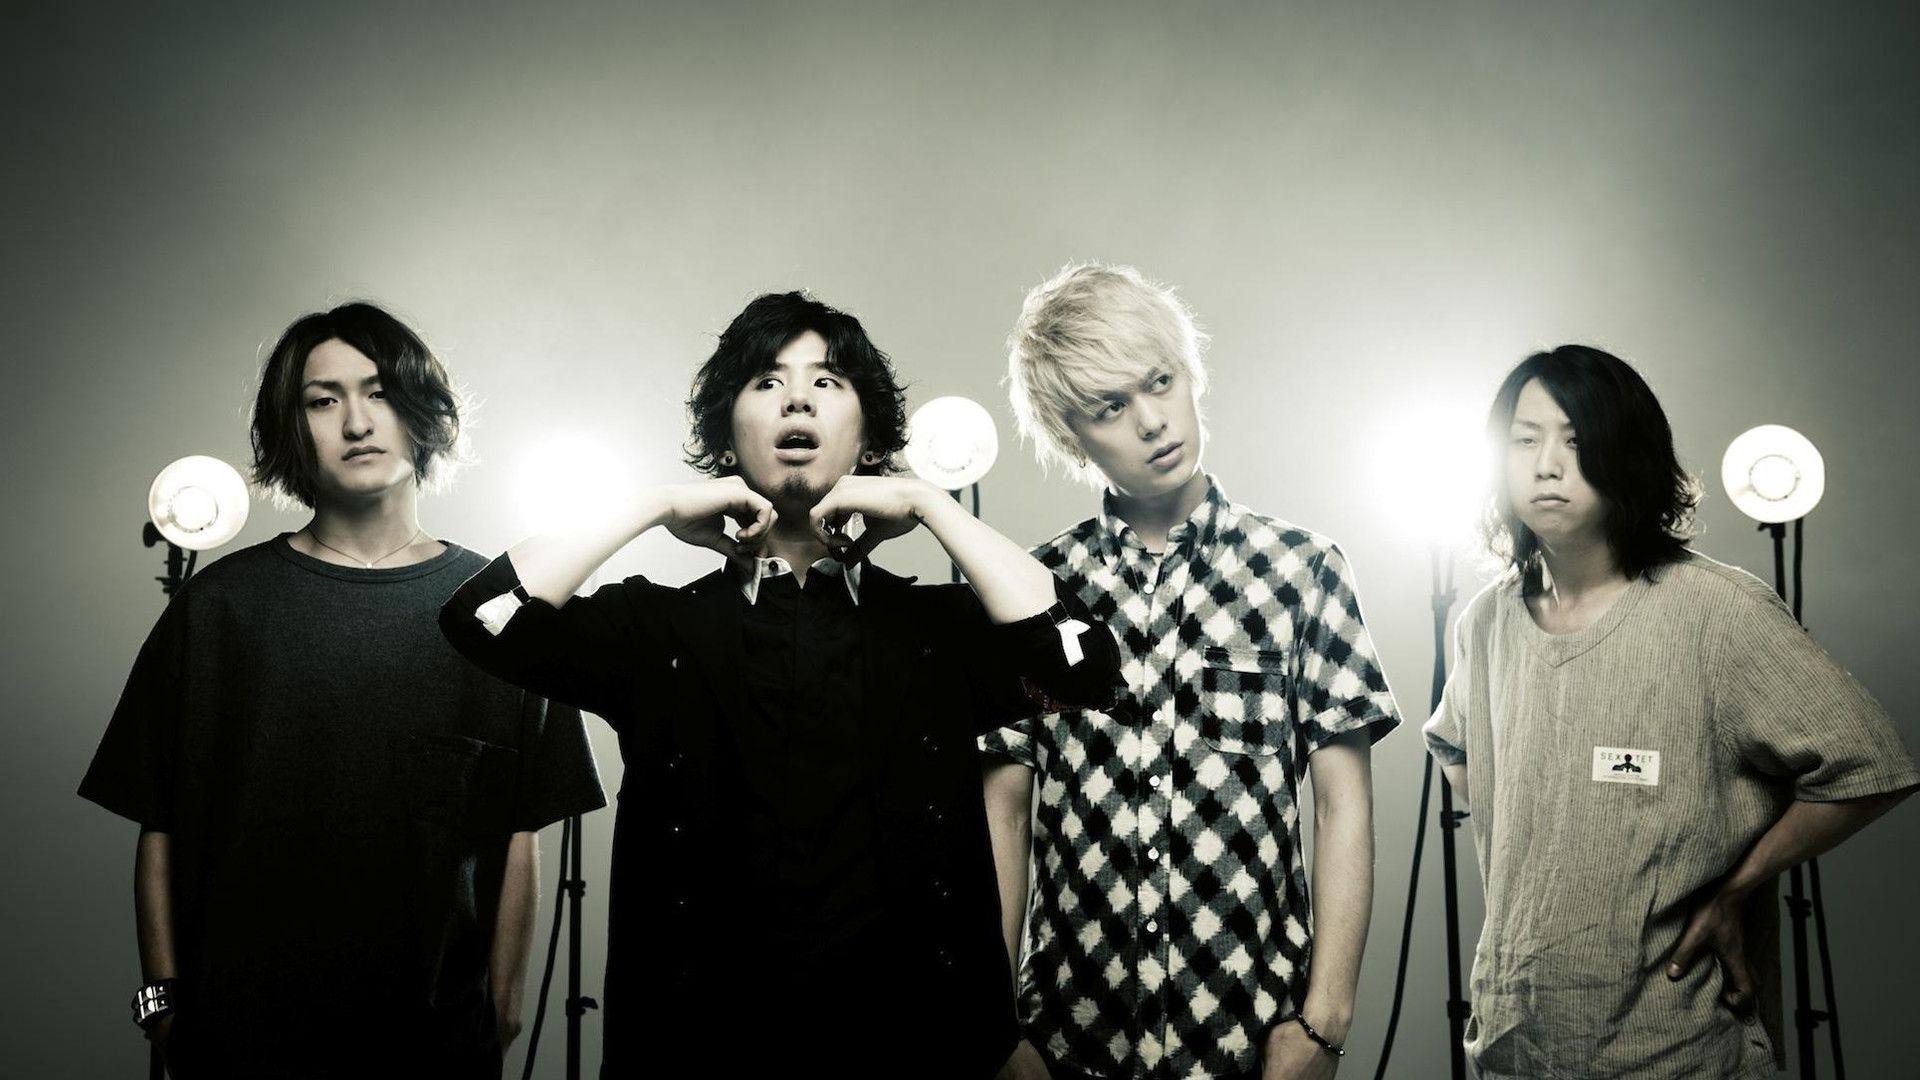 One Ok Rock Wallpapers Top Free One Ok Rock Backgrounds